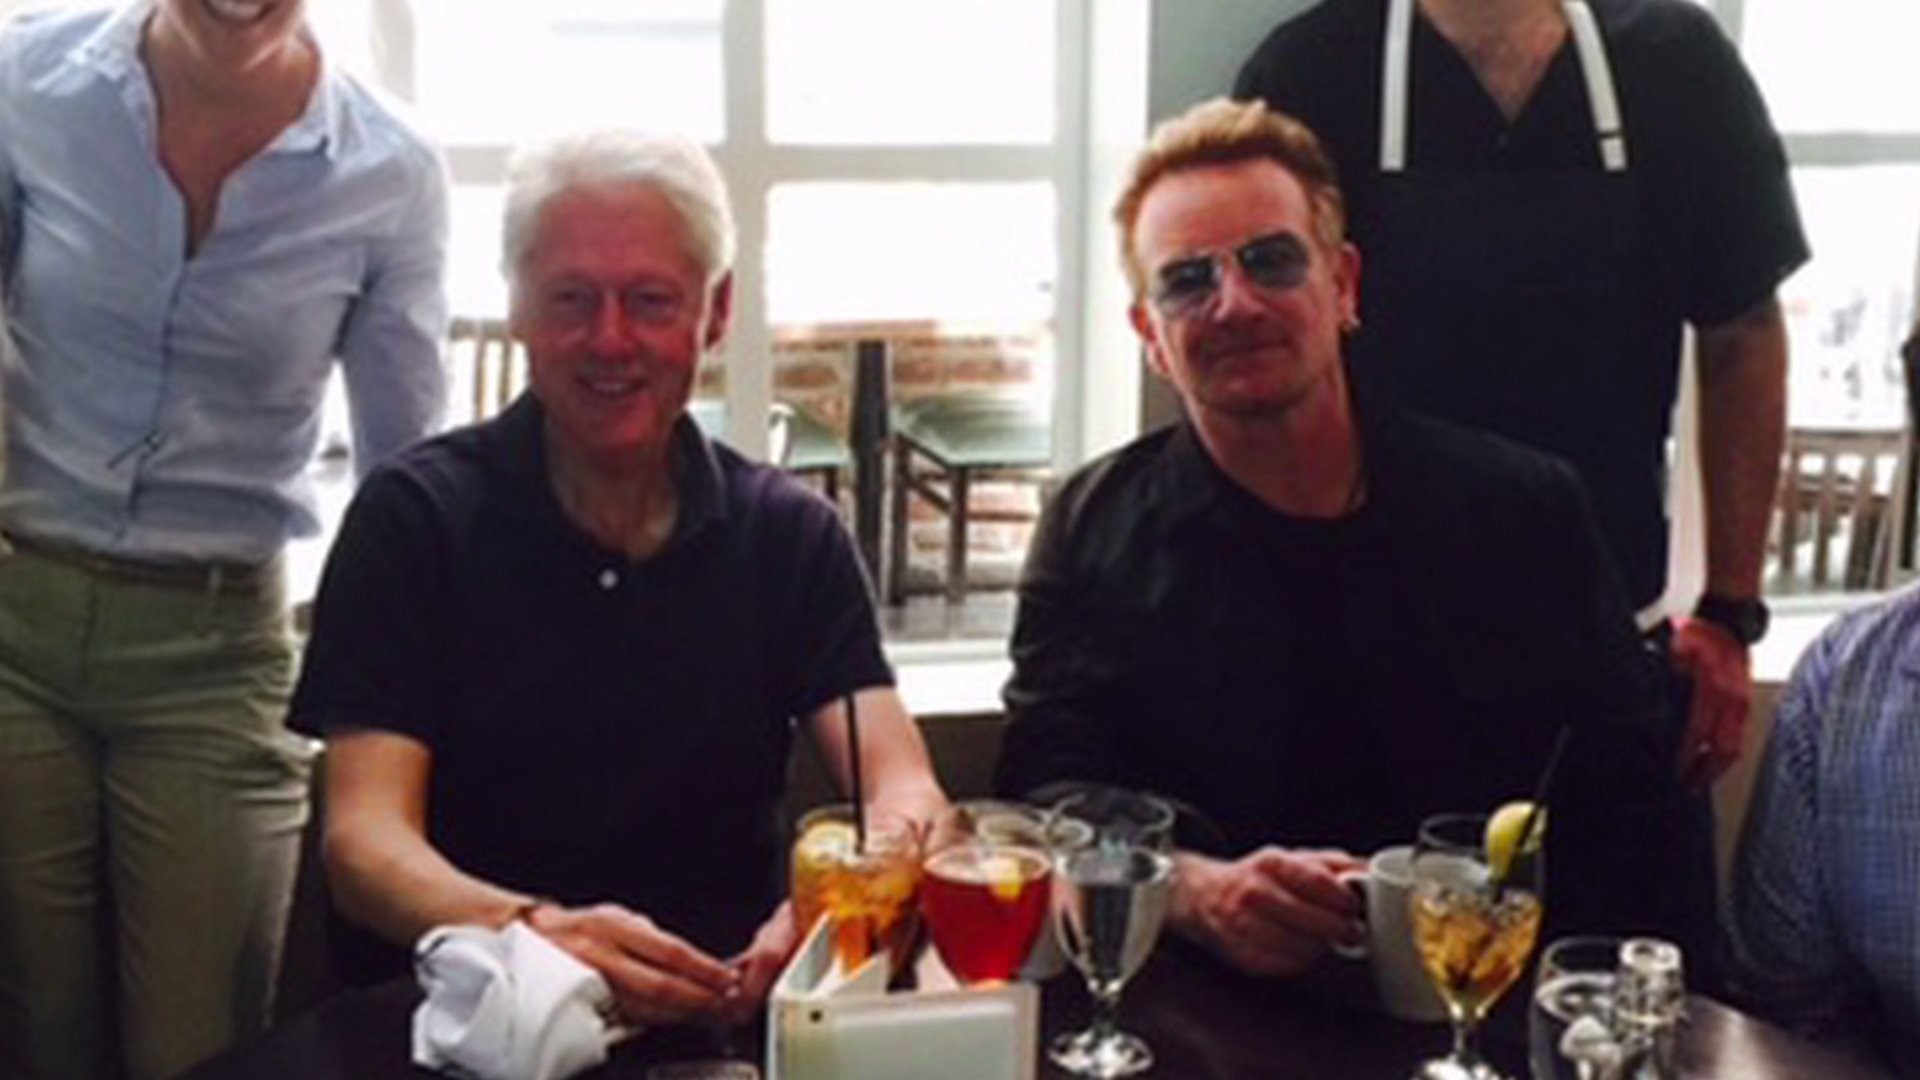 Bill Clinton and Bono have lunch in Denver